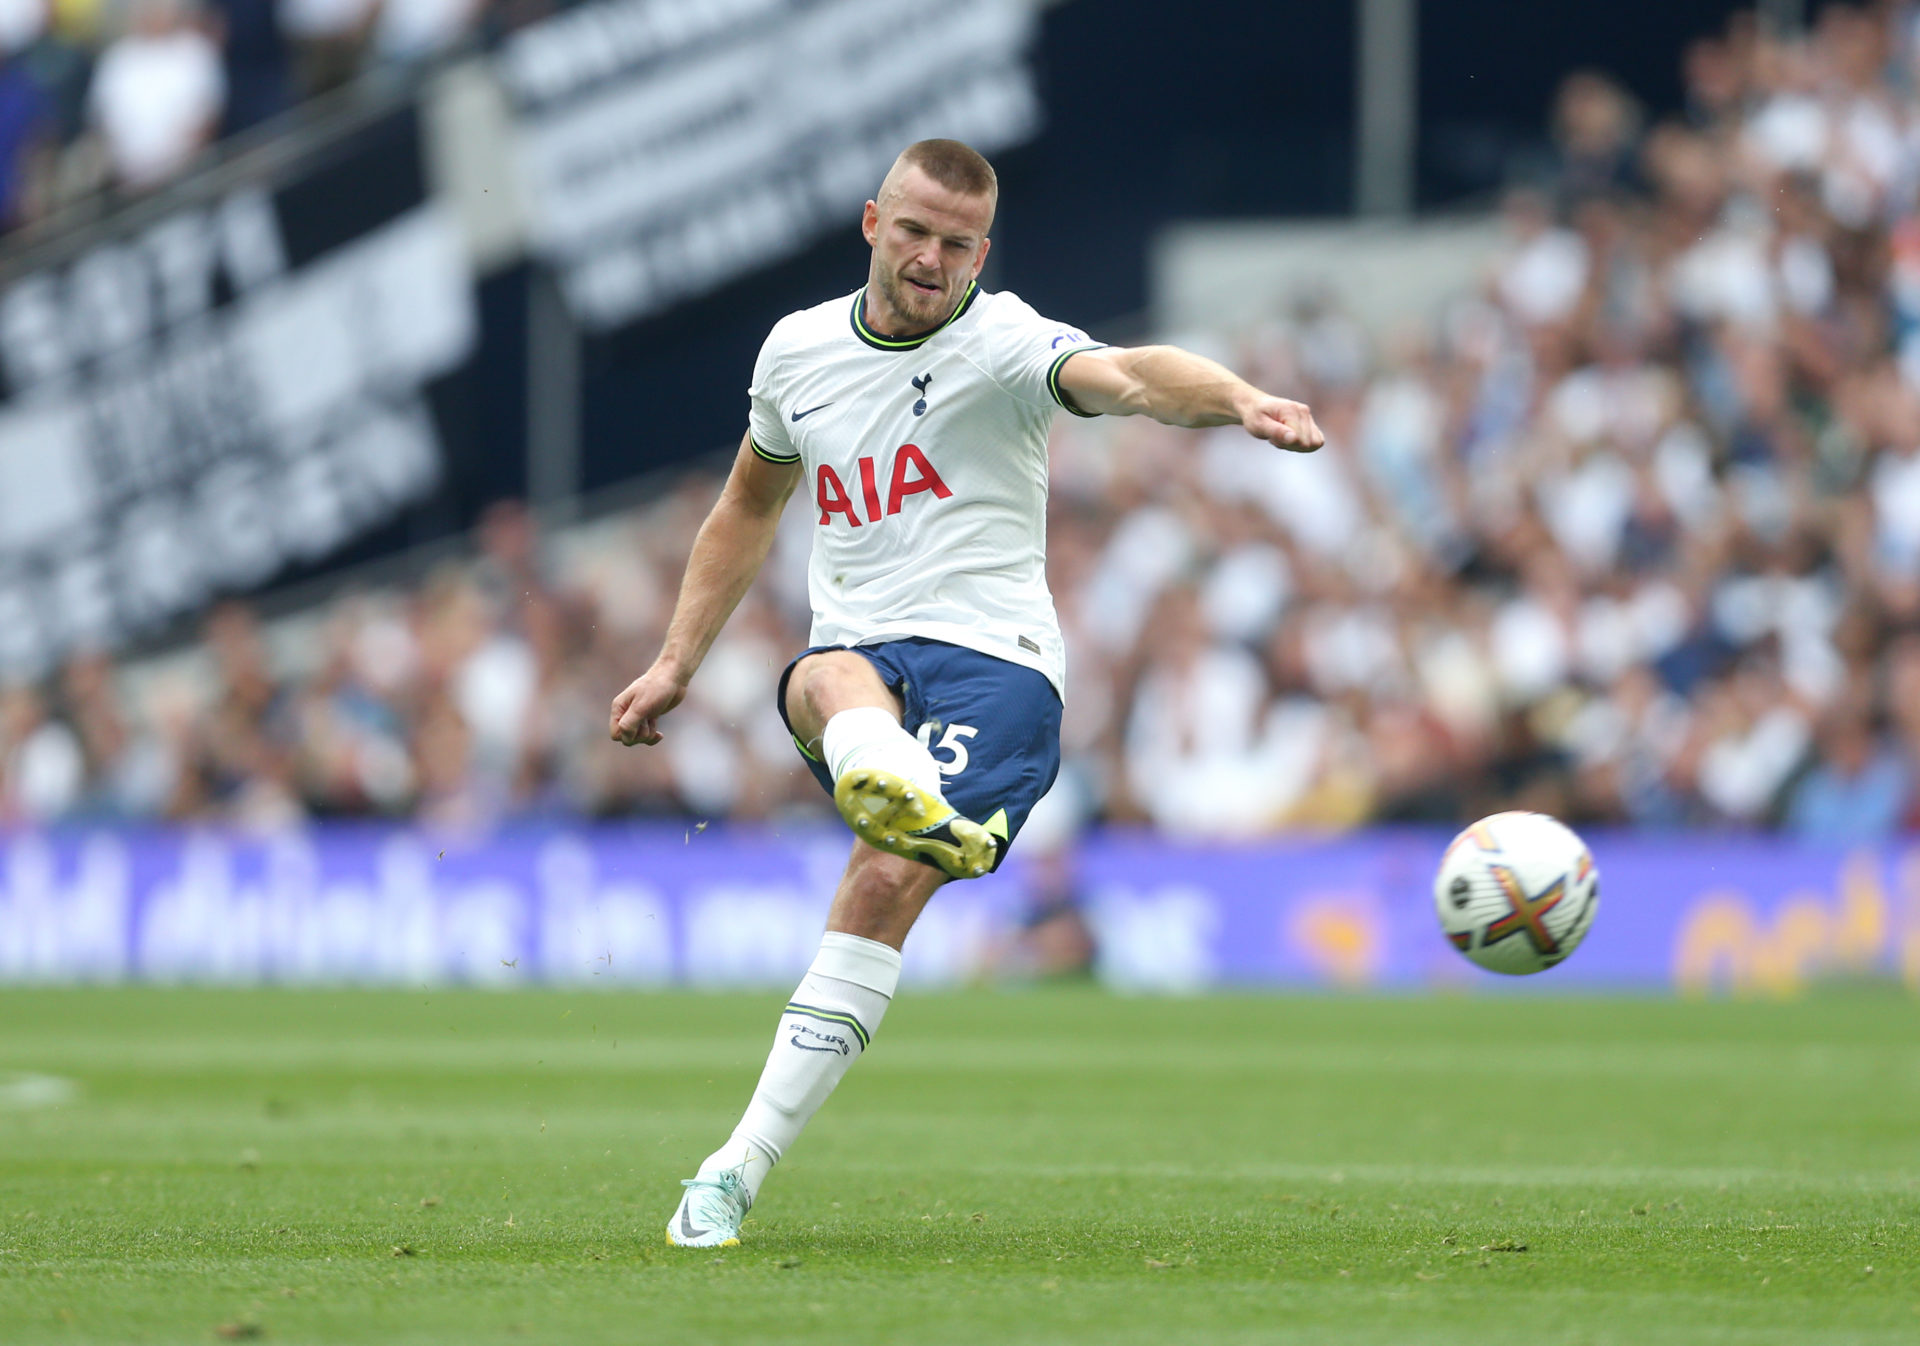 Every Tottenham manager picked Dier